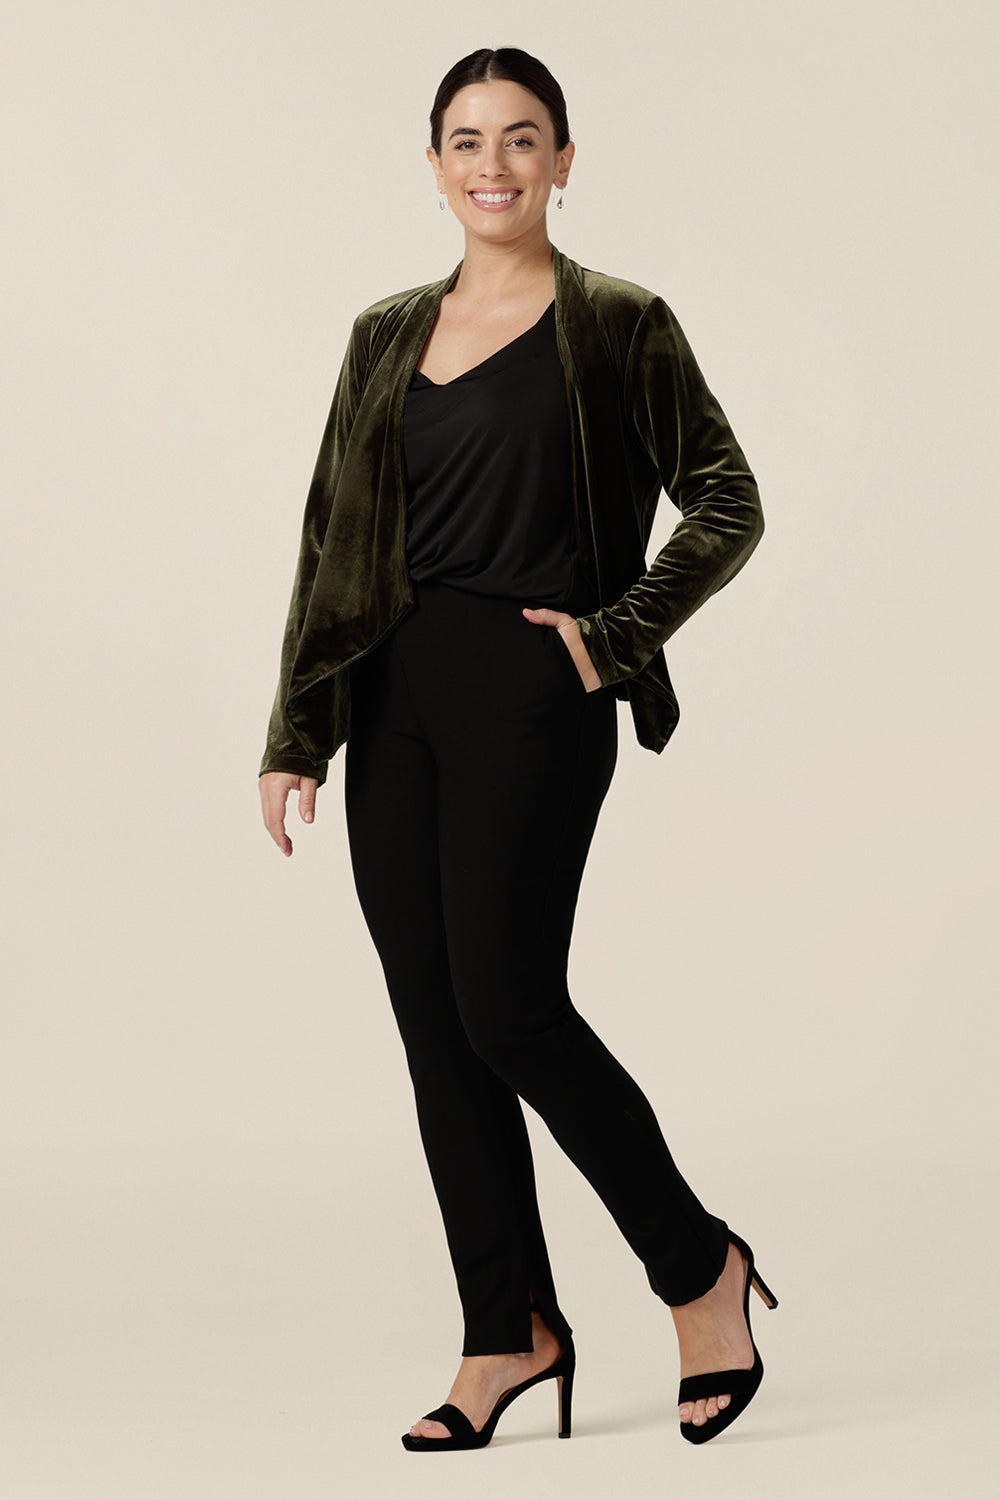 A size 10, petite height woman wears a waterfall front velour jacket for evening and cocktail wear. In bracken green this cocktail jacket worn with a black cami top and black slim leg trousers. A good jacket for evening and wedding guest outfits, step out in style at your next event in made-in-Australian occasionwear by Leina & Fleur.